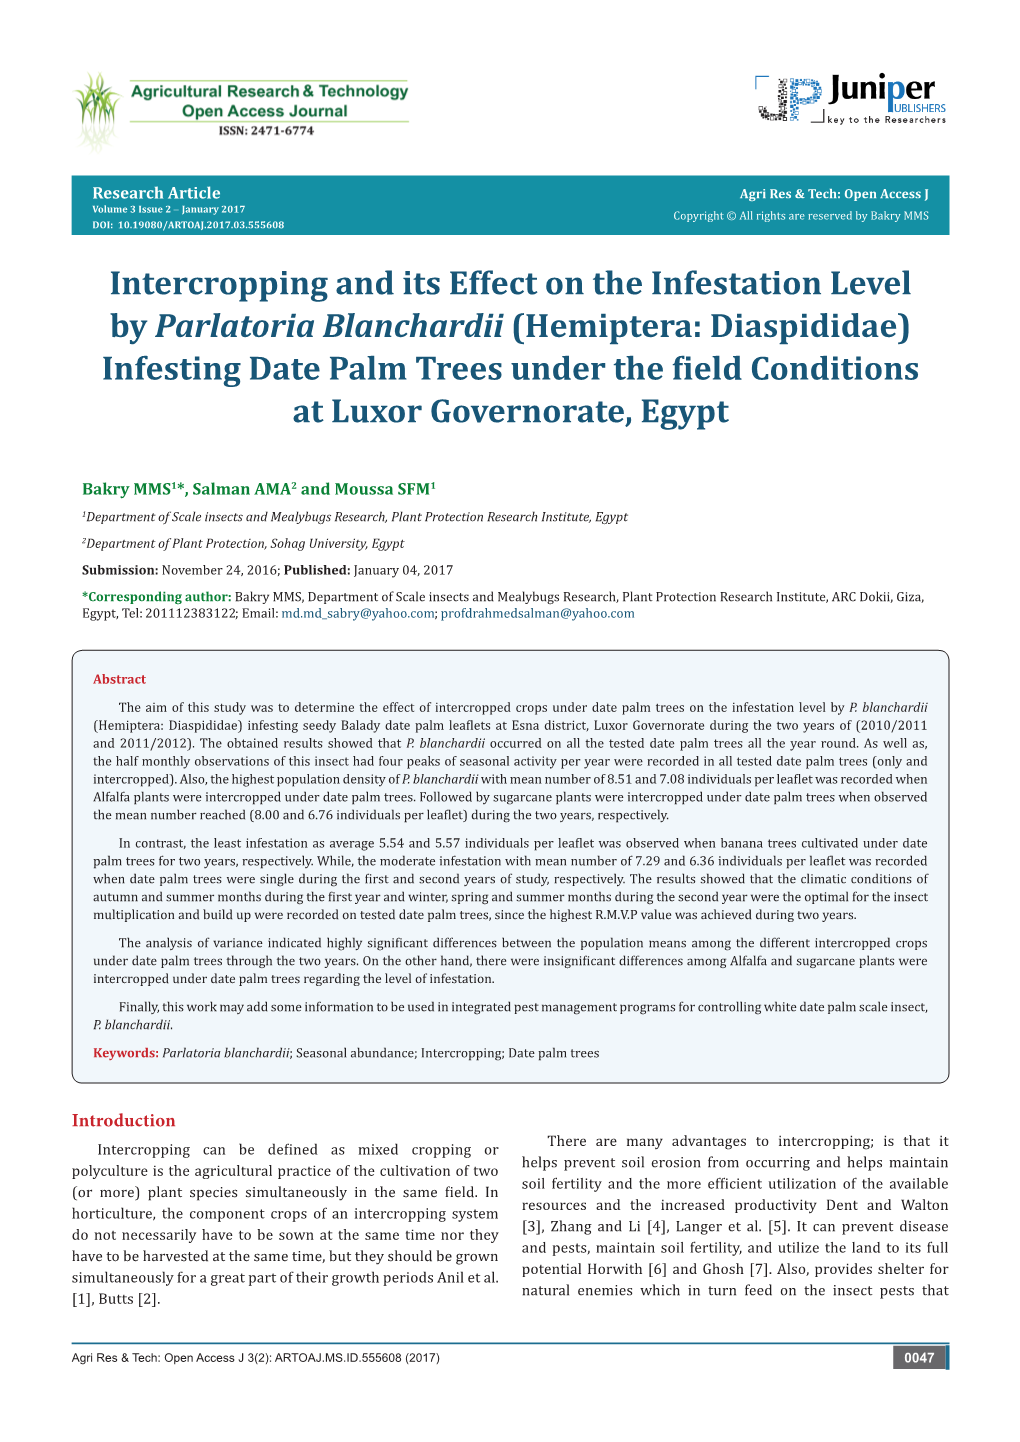 Intercropping and Its Effect on the Infestation Level by Parlatoria Blanchardii (Hemiptera: Diaspididae) Infesting Date Palm